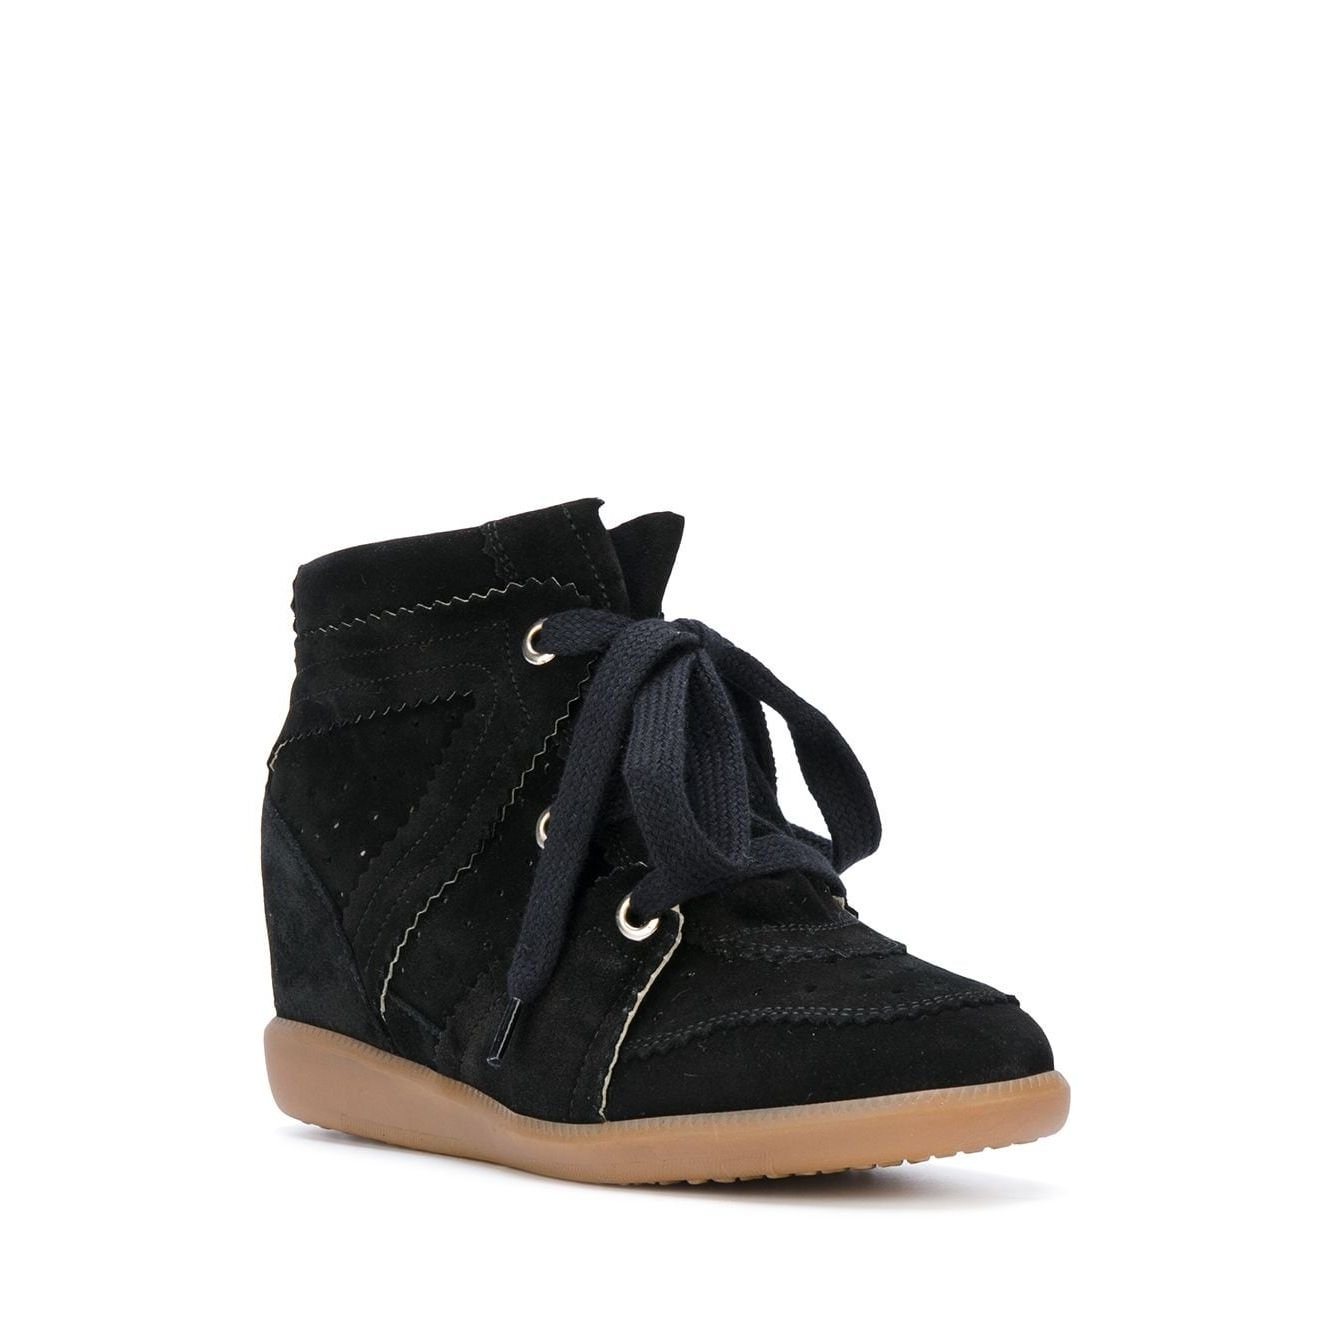 ISABEL MARANT BOBBY WEDGE SNEAKERS IN BLACK | SIZE 5 OR EU 36